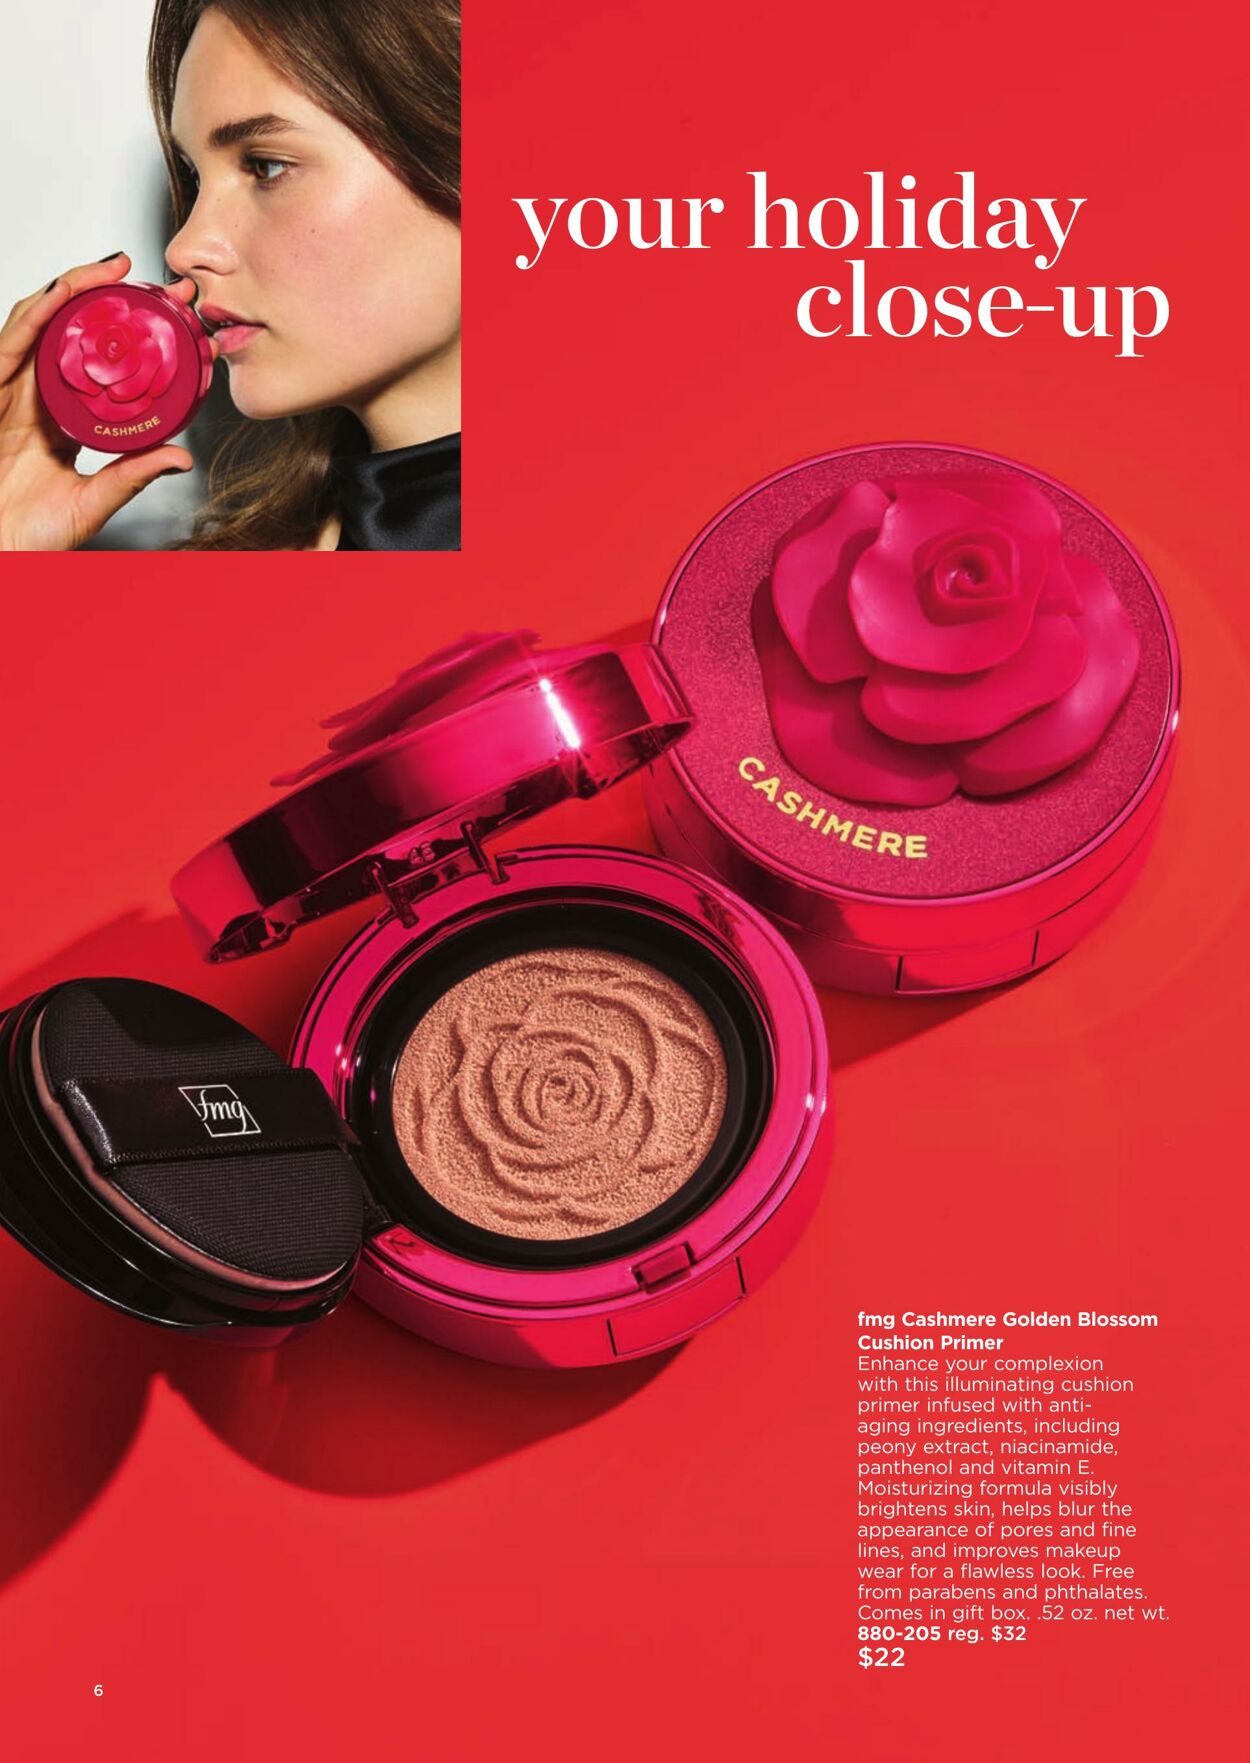 Weekly ad Avon 11/01/2022 - 12/31/2022